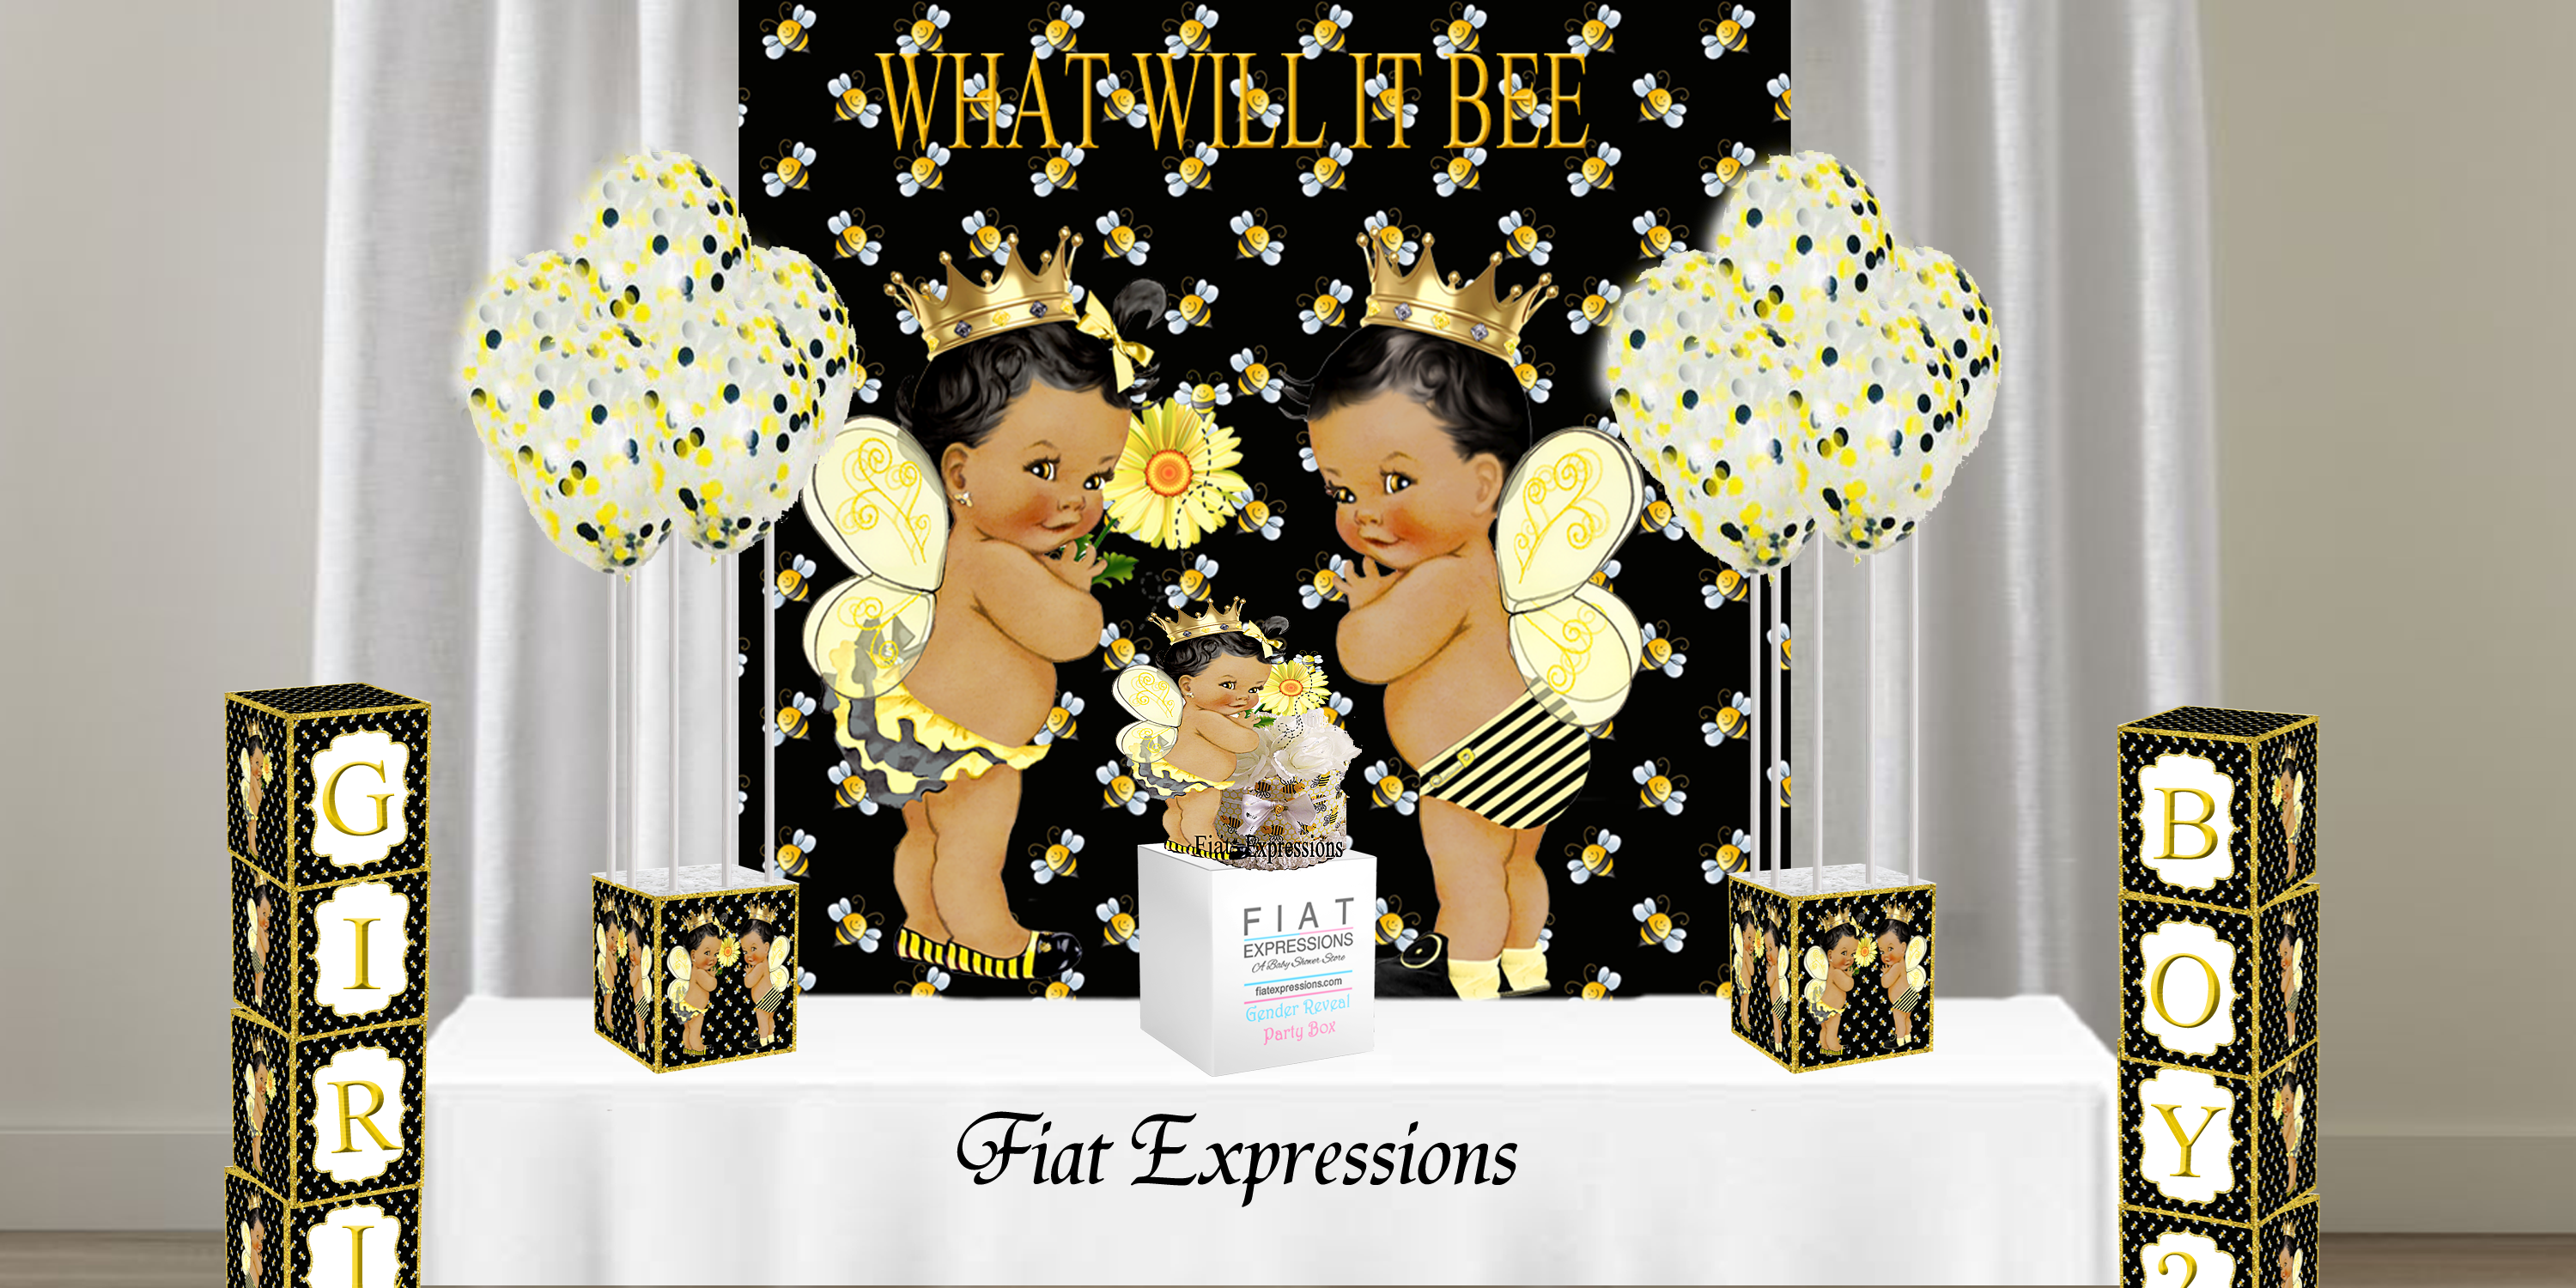 https://fiatexpressions.com/wp-content/uploads/2021/01/BEE-BLACK-WITH-JEW-BABIES-POSTER-BALLOONS-BLOCKS-GIRL-CAKE-FIAT.png